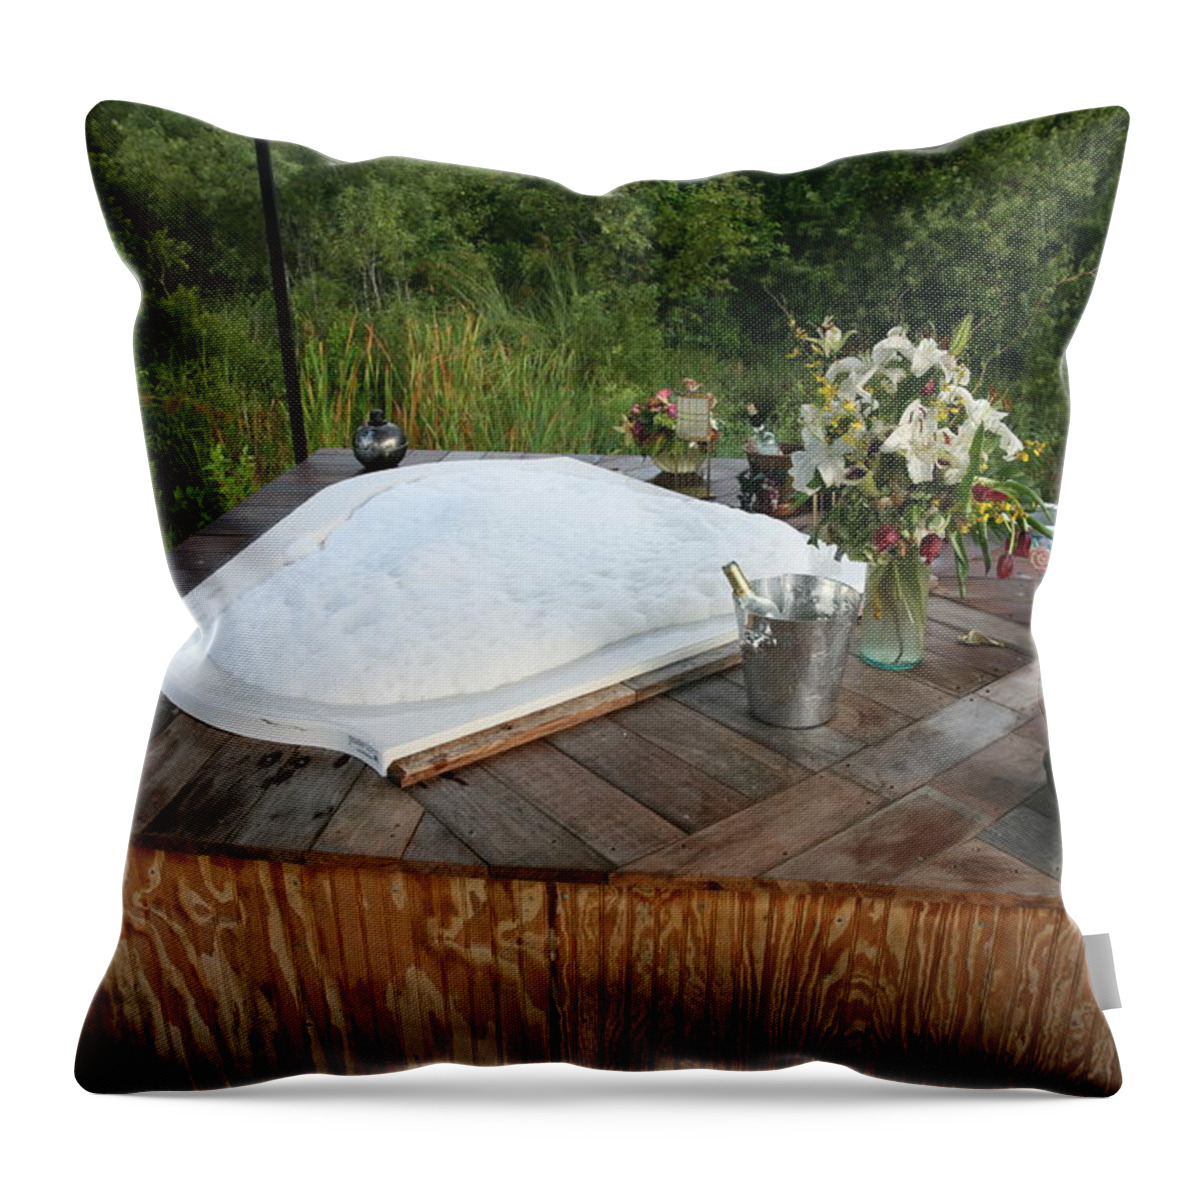 Everglades City Fl Professional Photographer Lucky Cole Throw Pillow featuring the photograph Bubble Bath by Lucky Cole